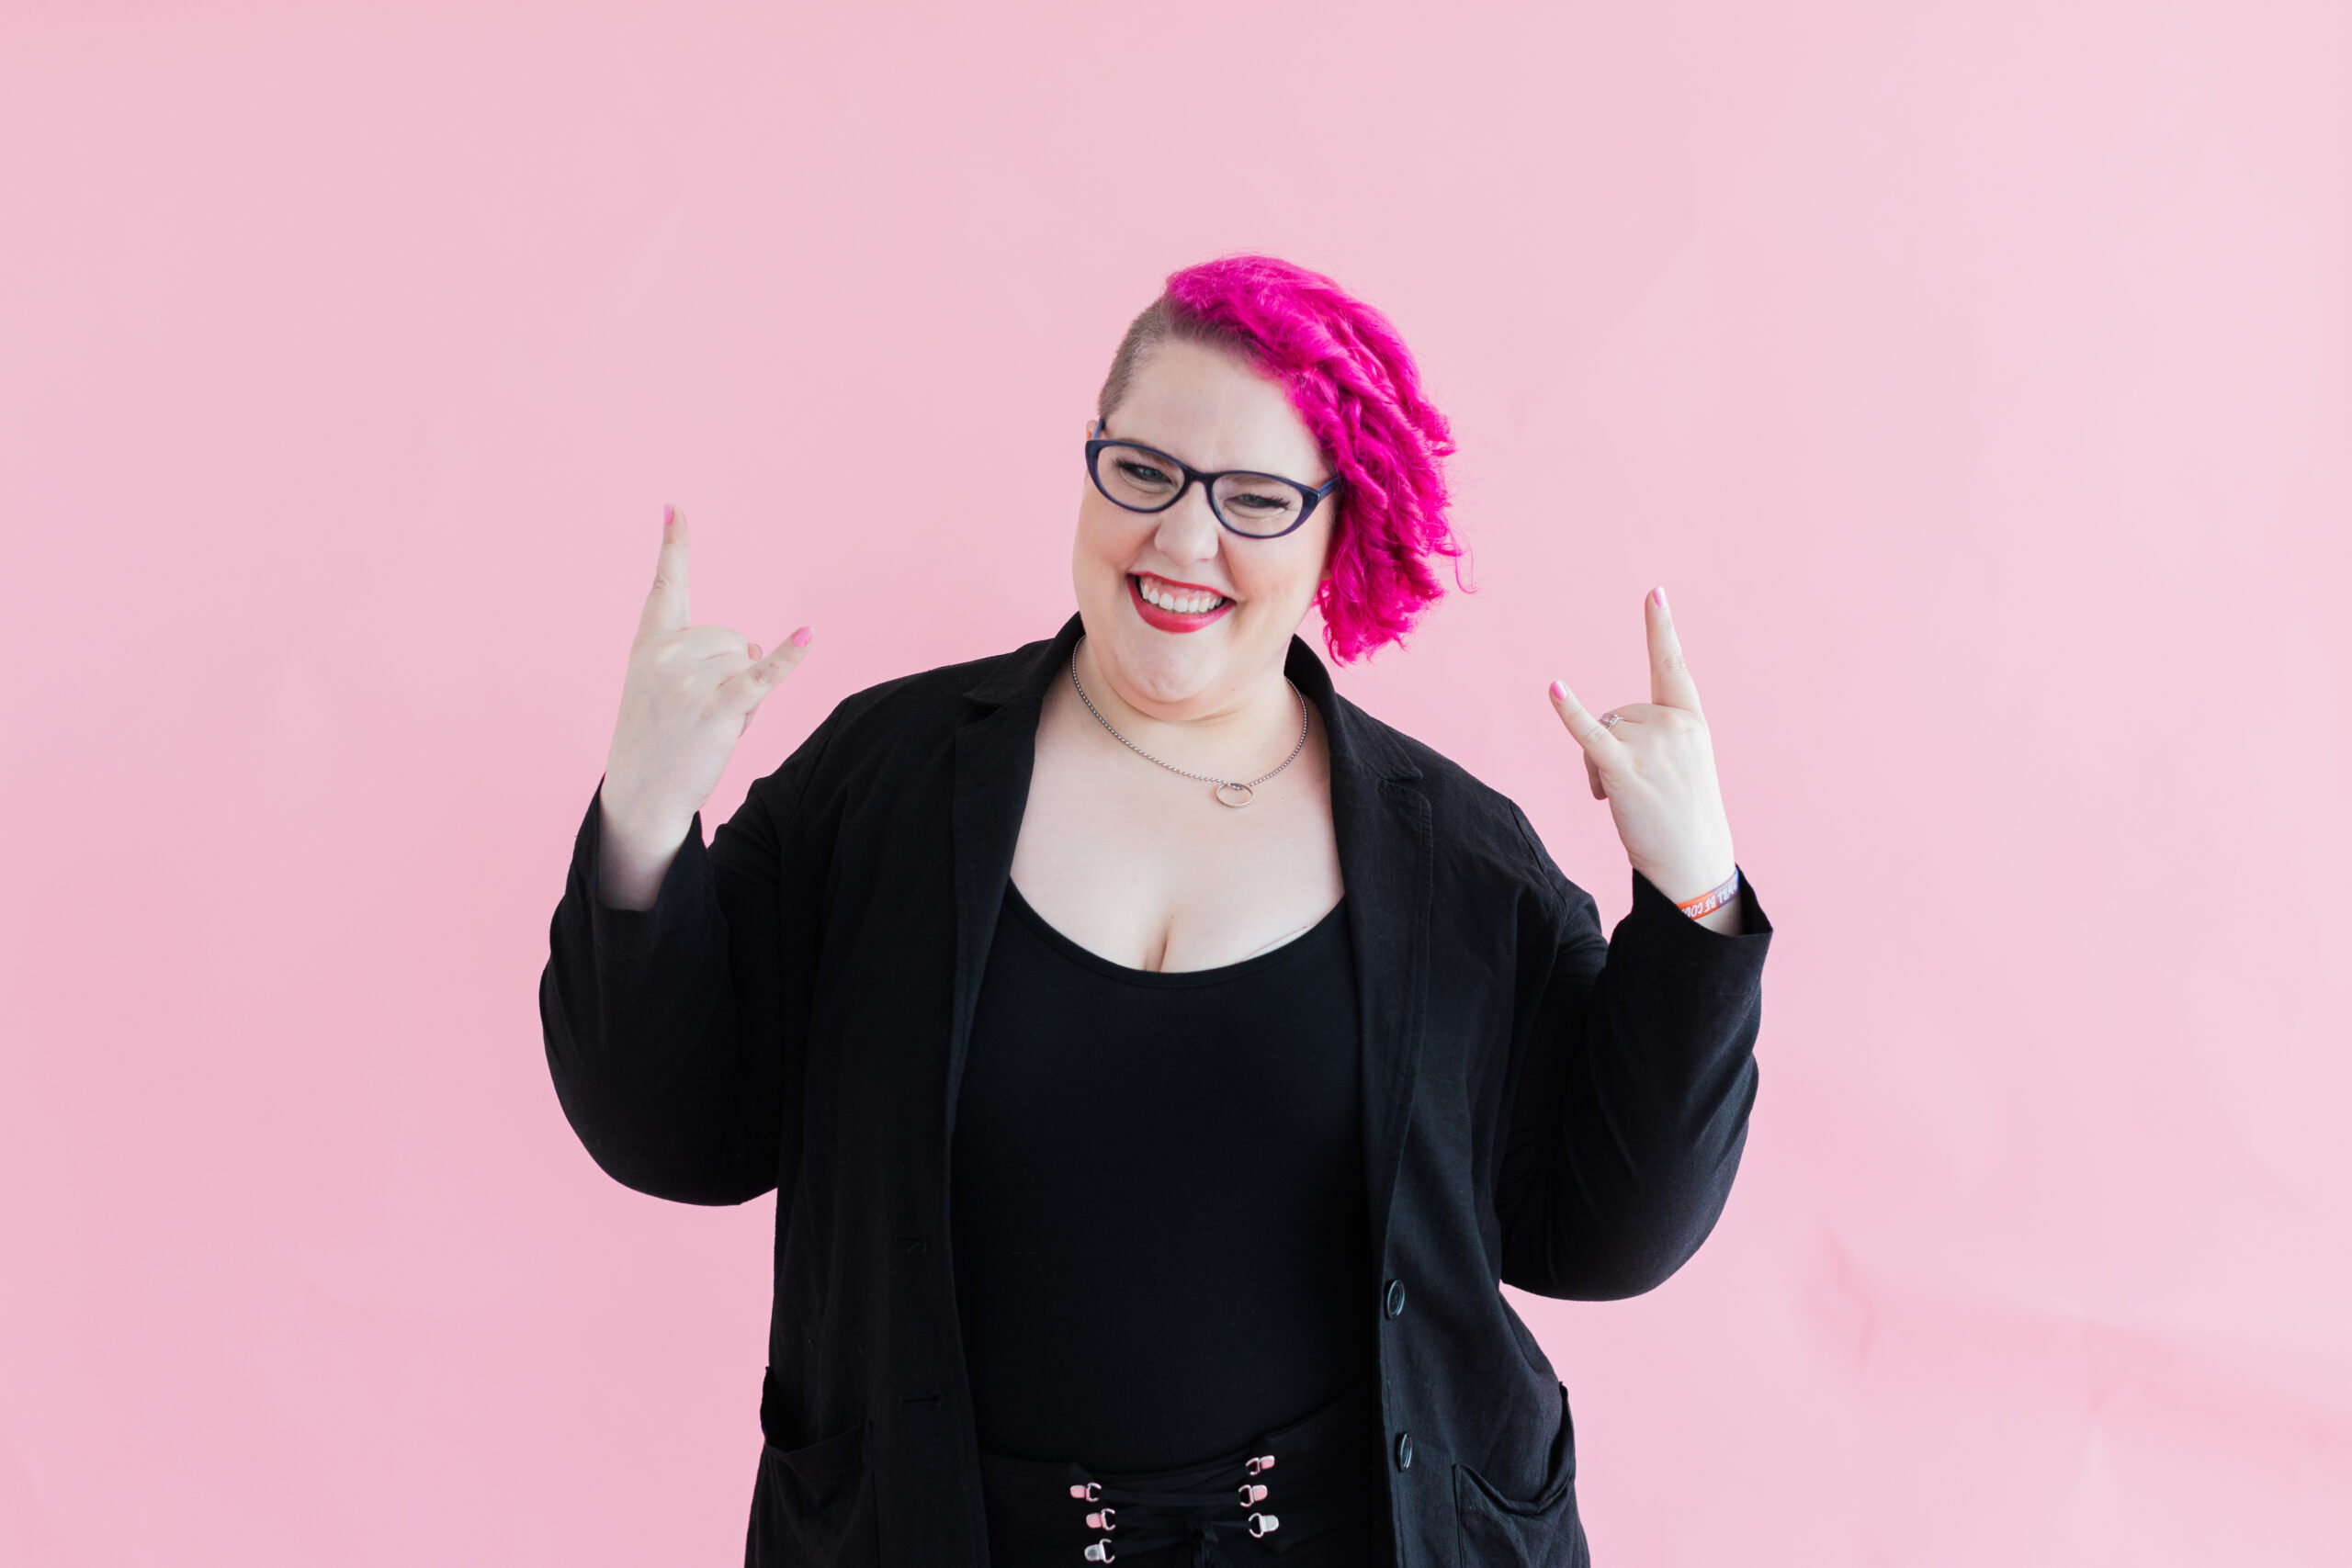 Dallas branding photographer; woman wearing all black and glasses with bright pink hair smiling and holding up rock n roll hands in front of a light pink background